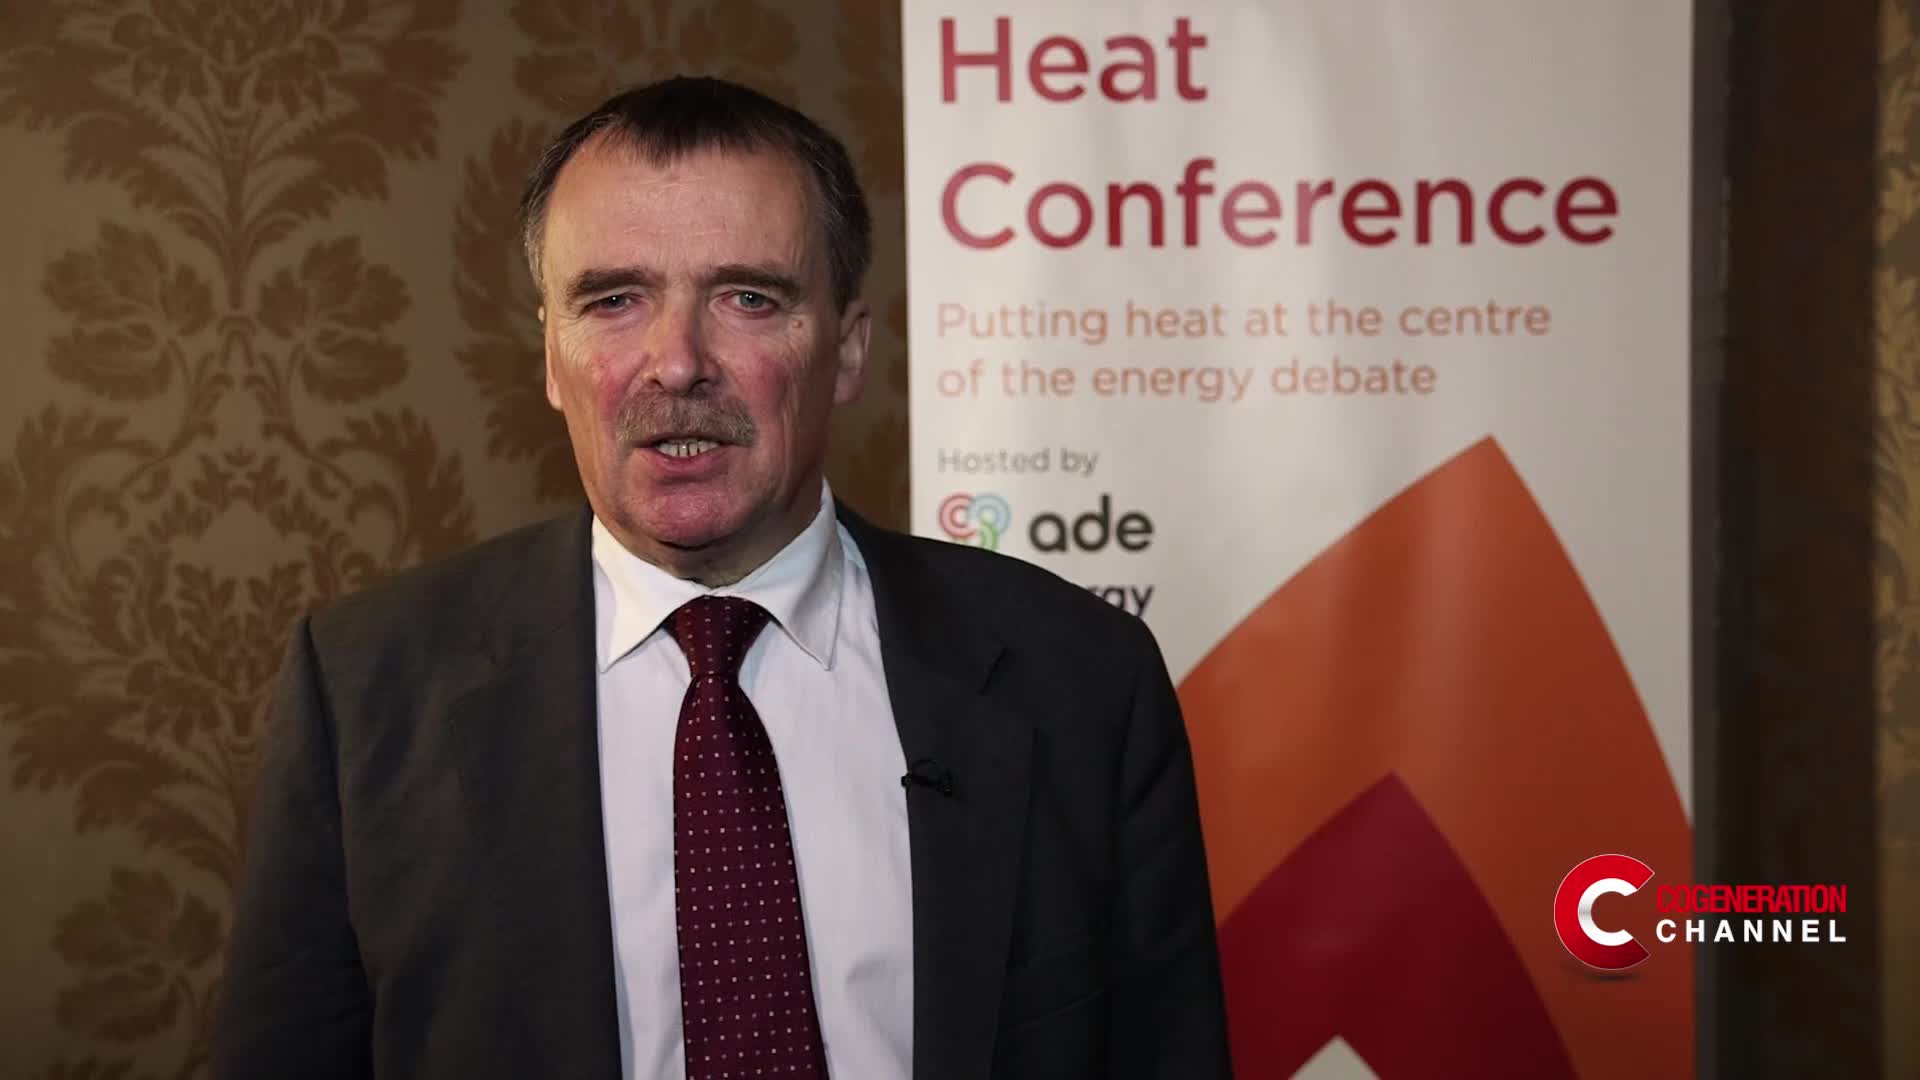 How will the spending review affect new district heating projects in the UK?